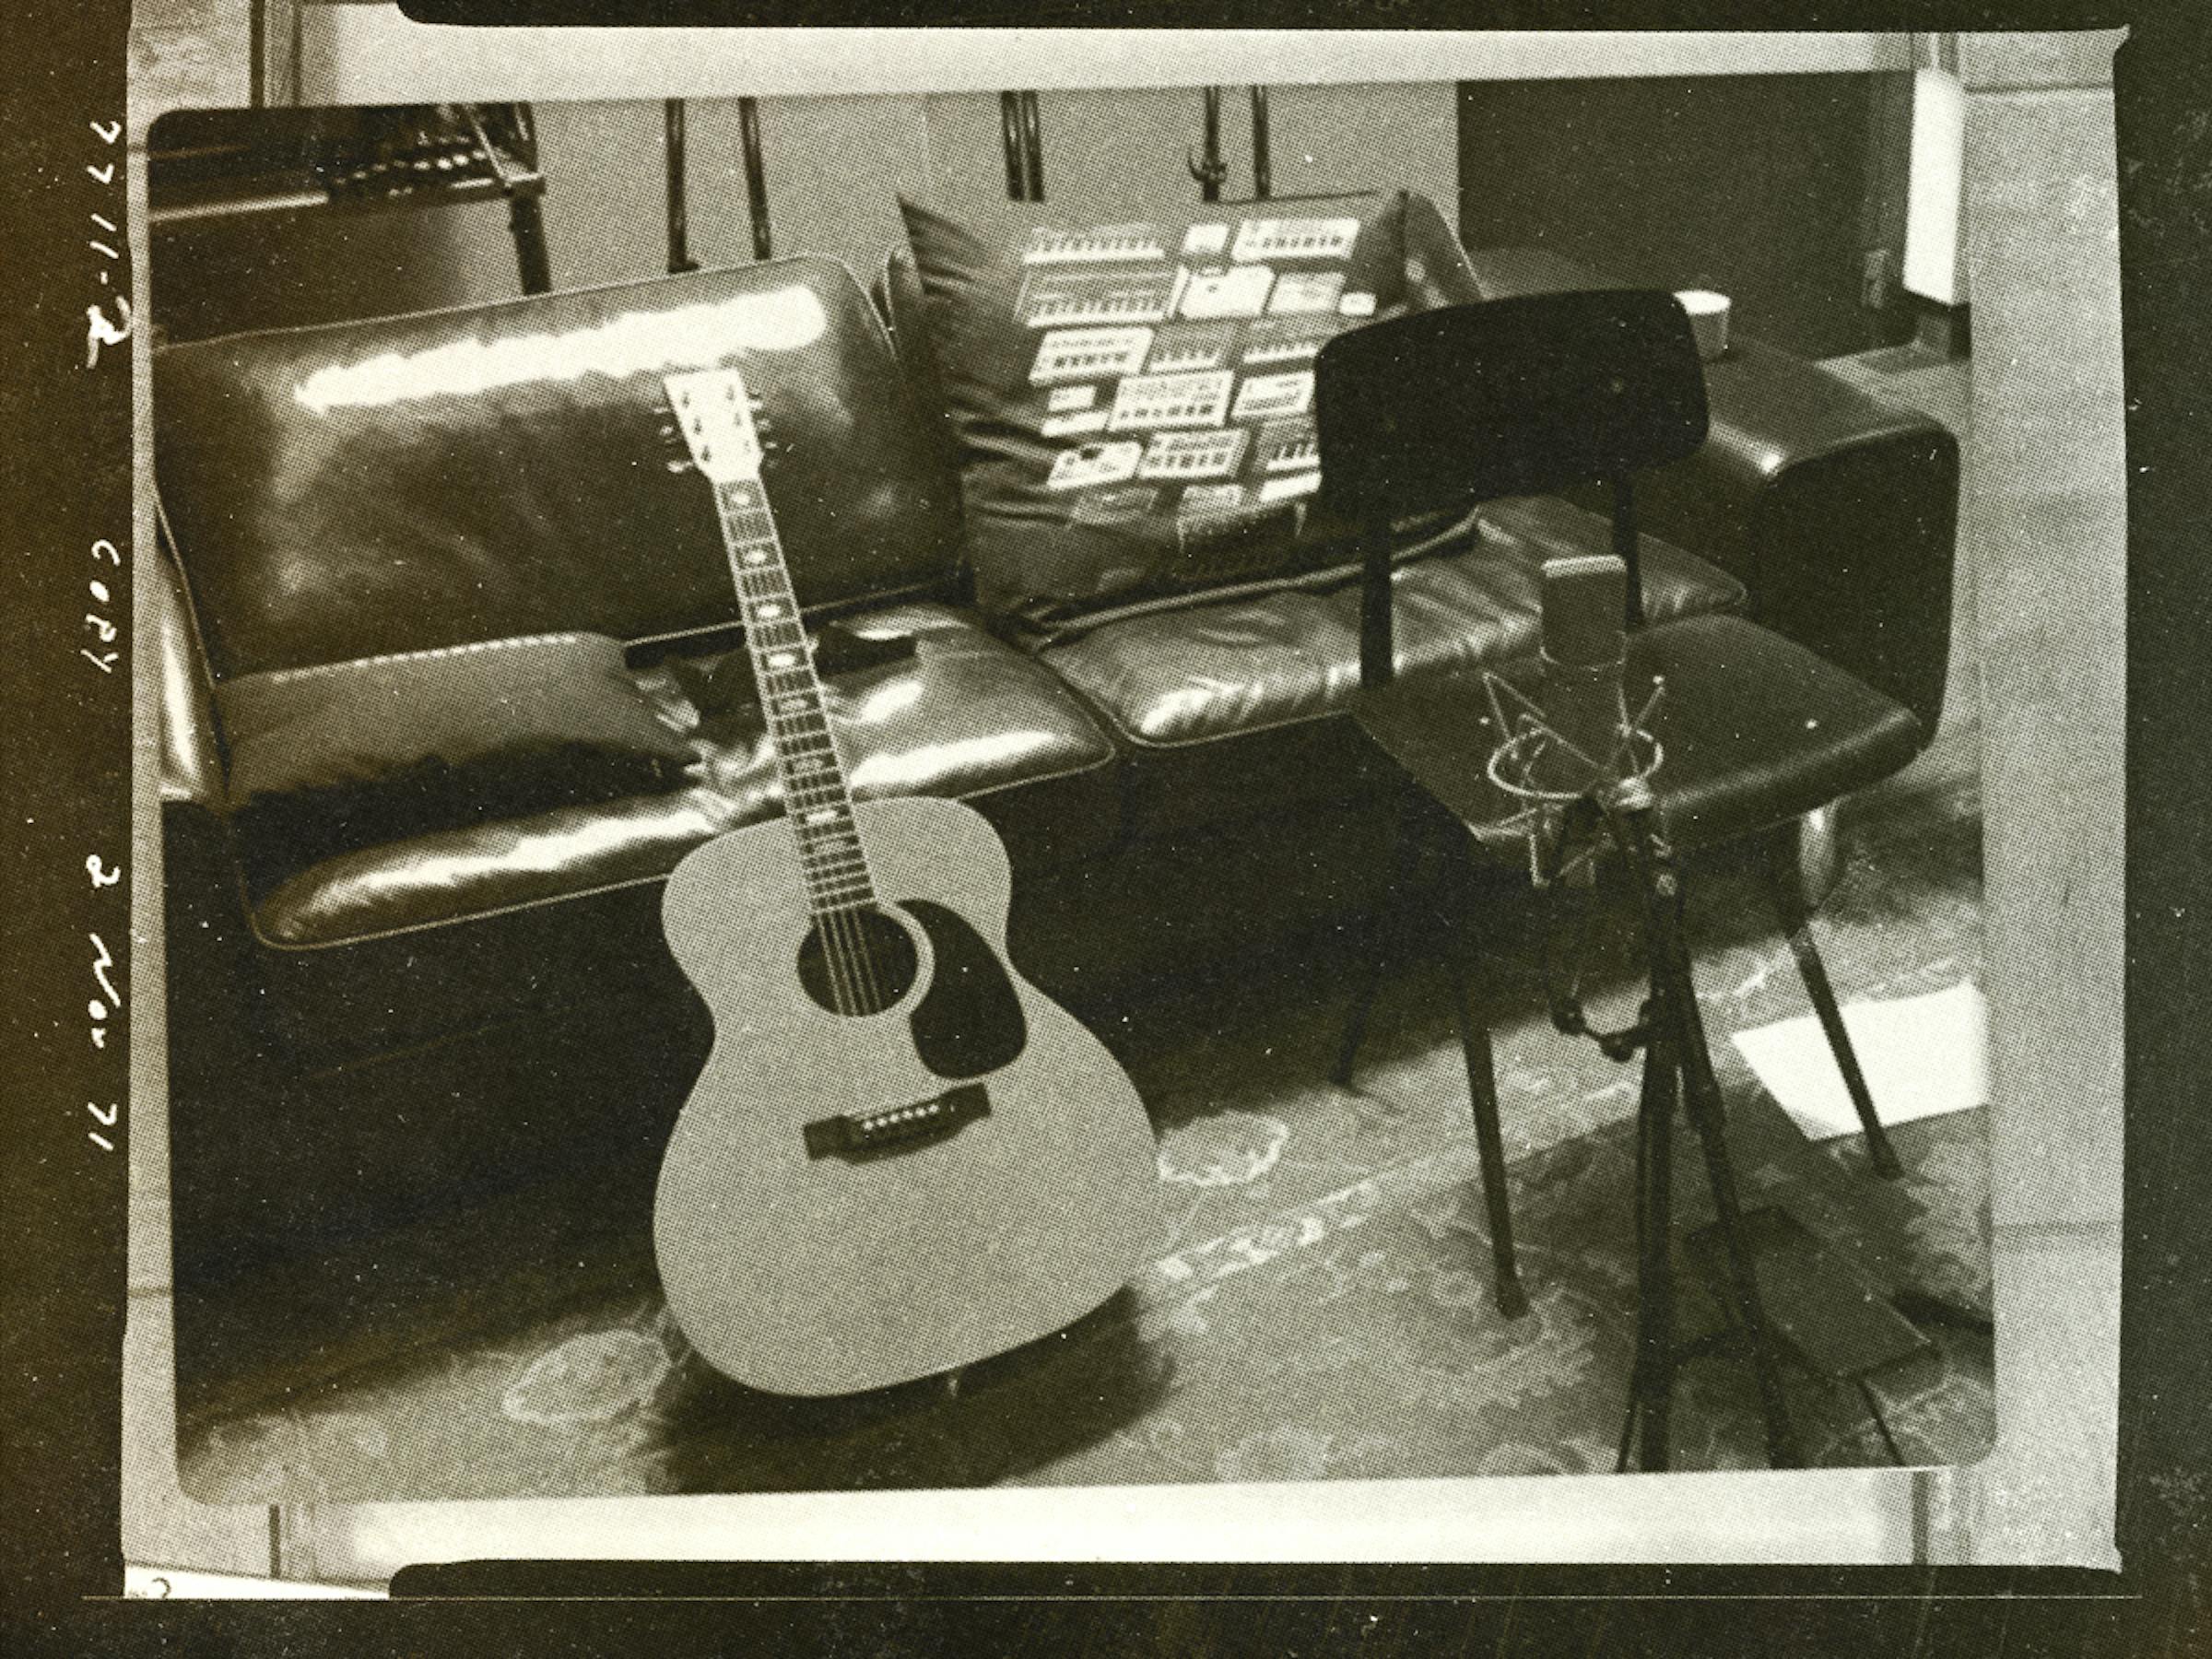 Guitar leaning against soft in studio